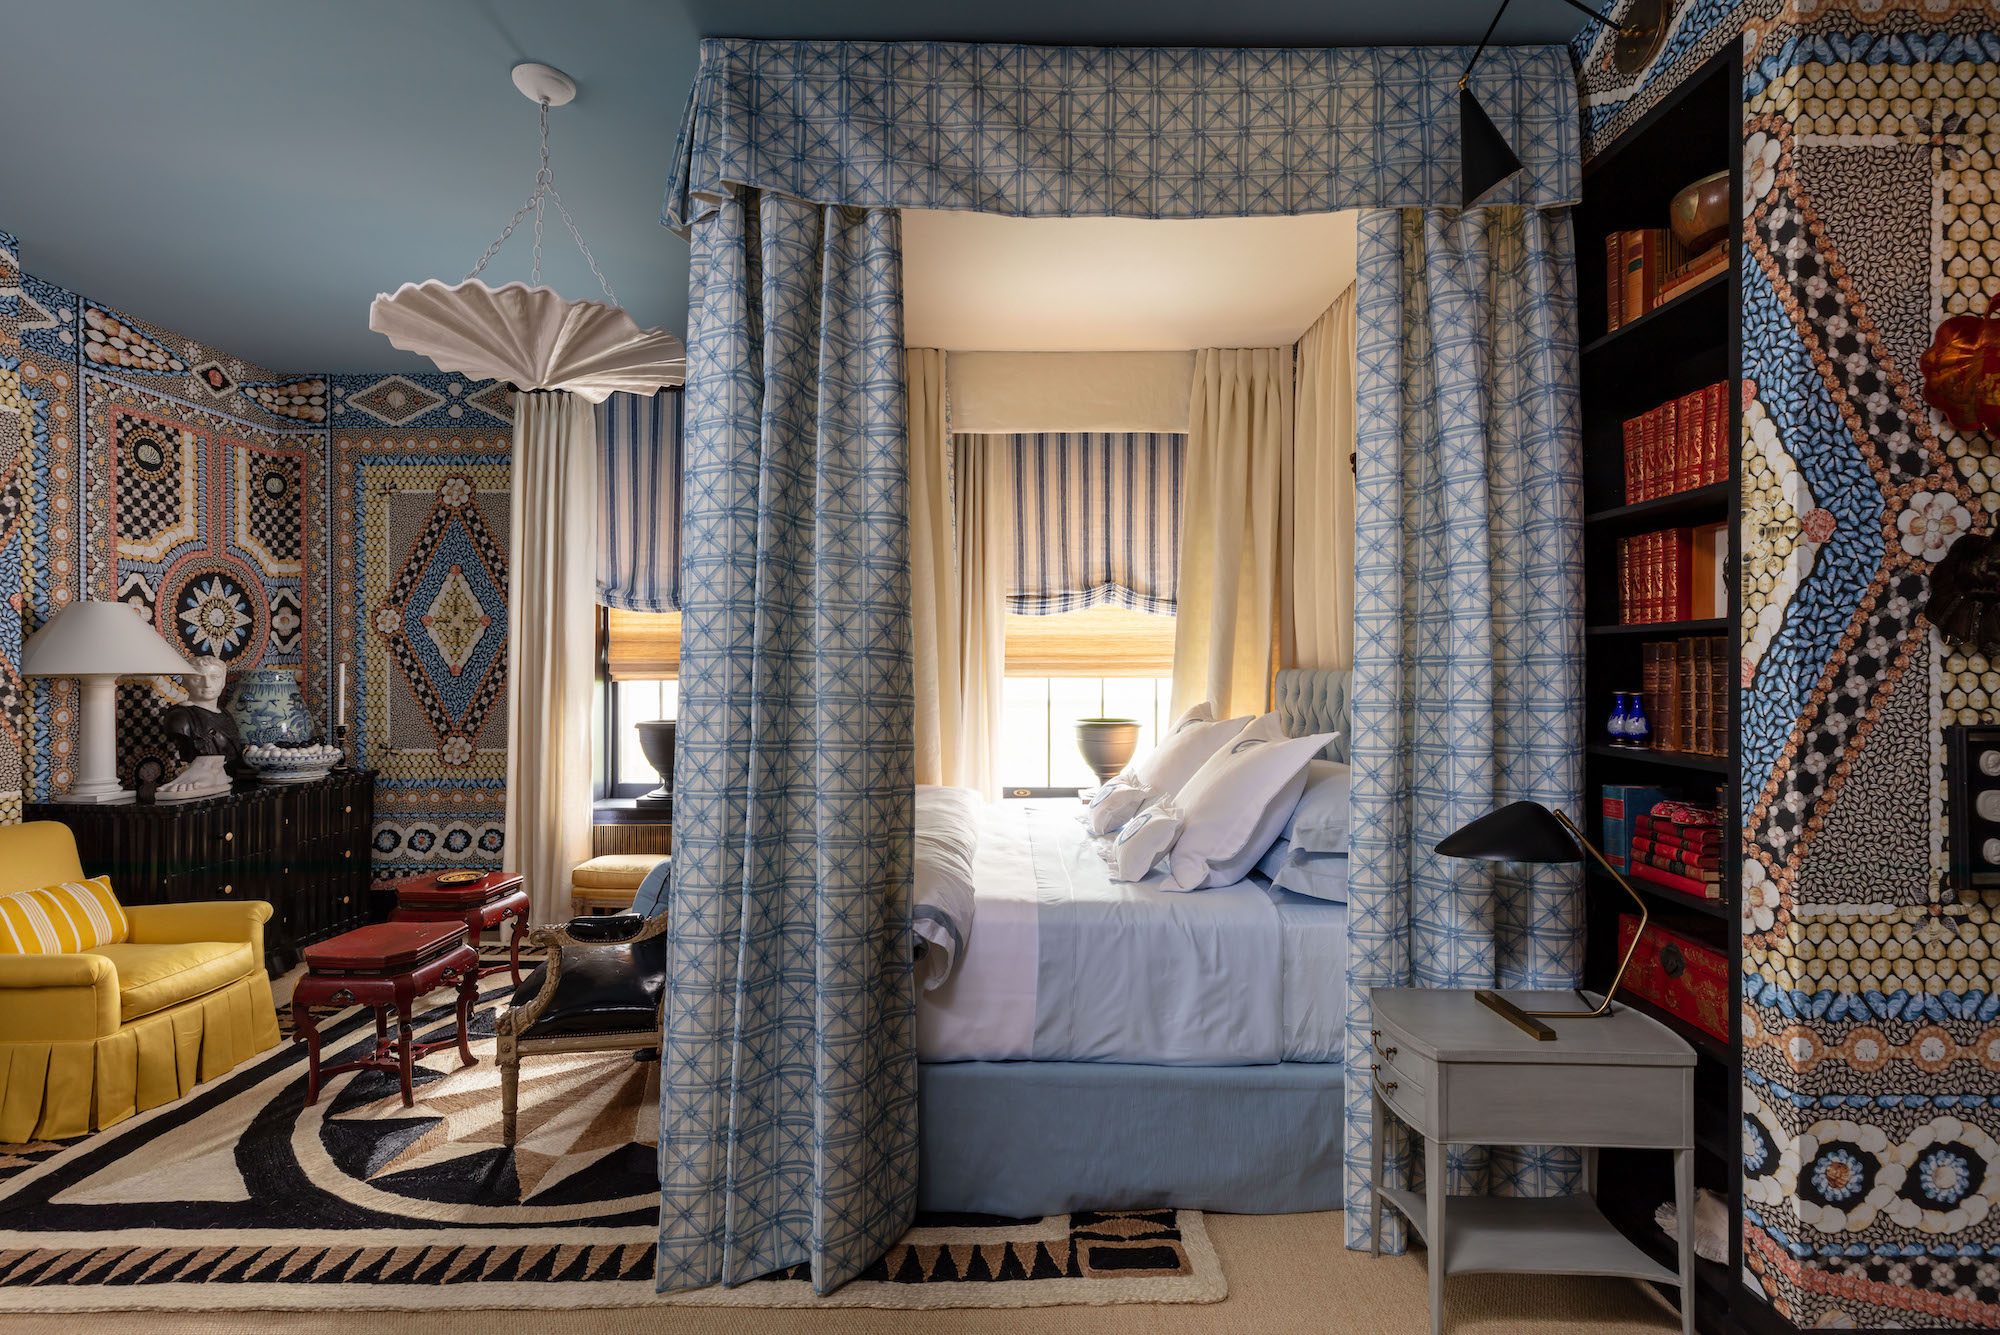 Interior designer Mary McDonald created a layered bedroom with wallpaper and drapery from Schumacher and floor coverings by Patterson Flynn at 2023's Kips Bay Decorator Show House New York in Effect Magazine